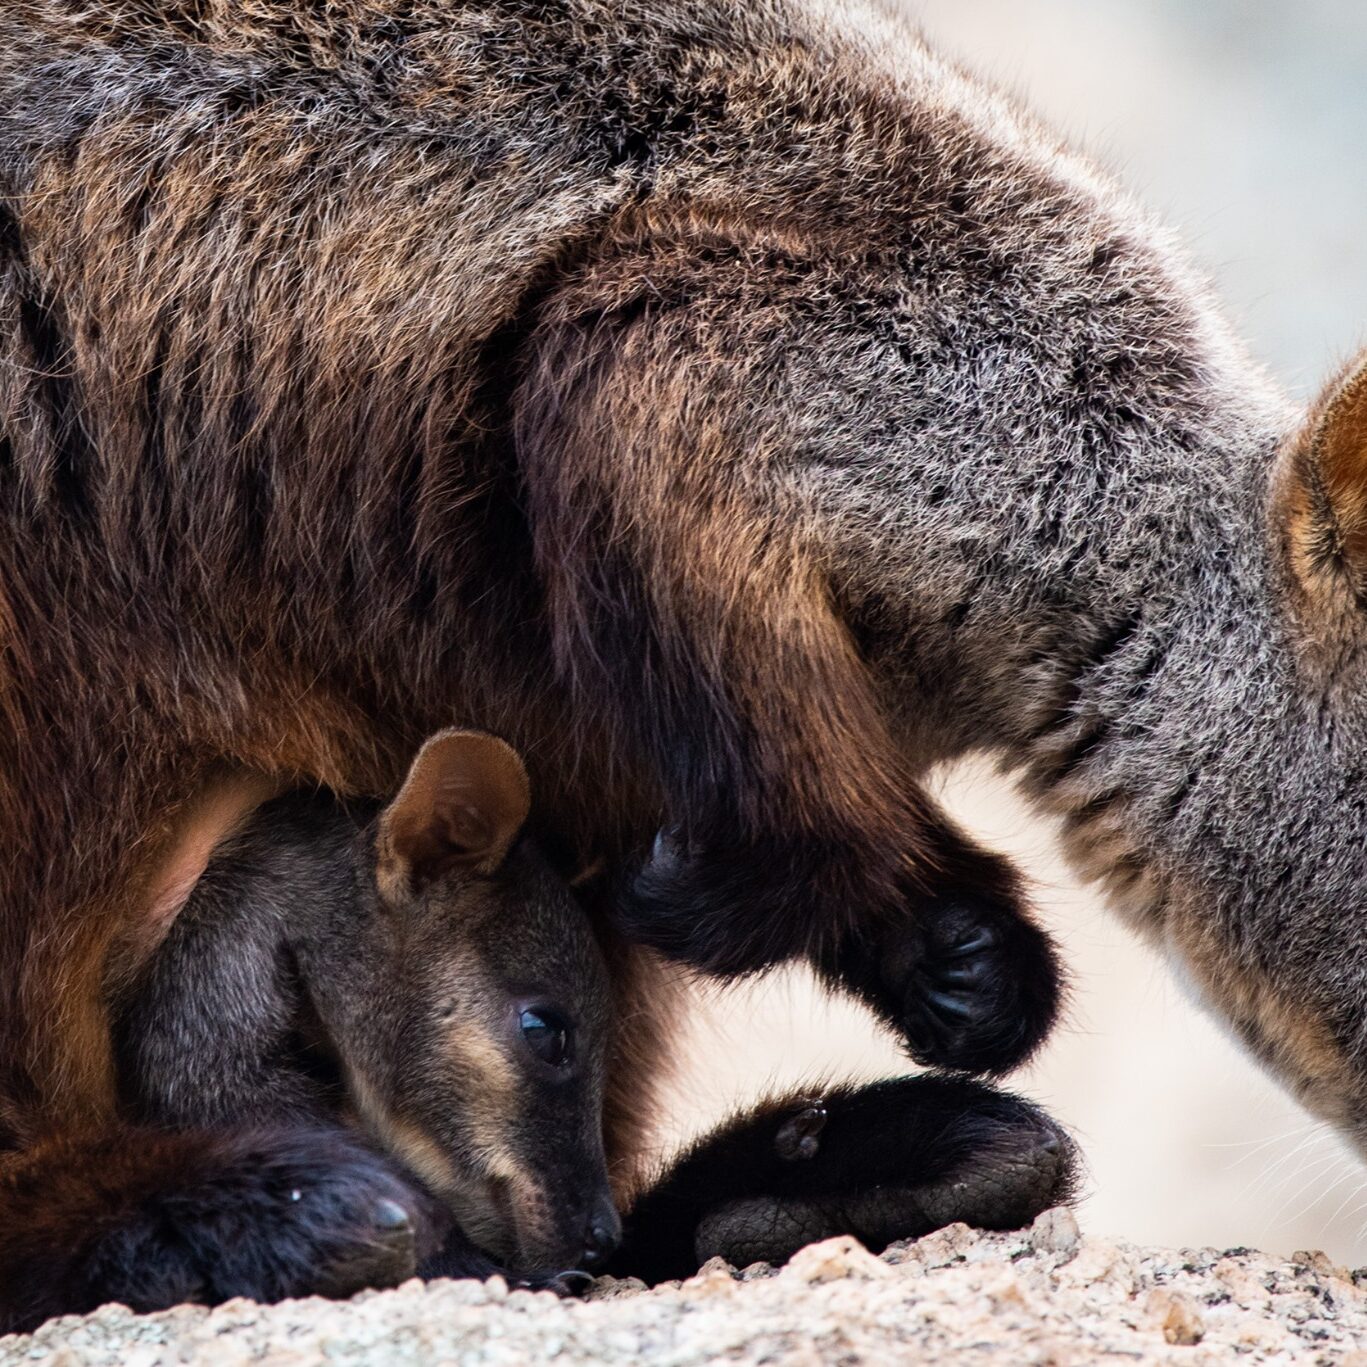 Southern Brush-tailed Rock-wallaby and her joey. Photo by Annette Ruzicka